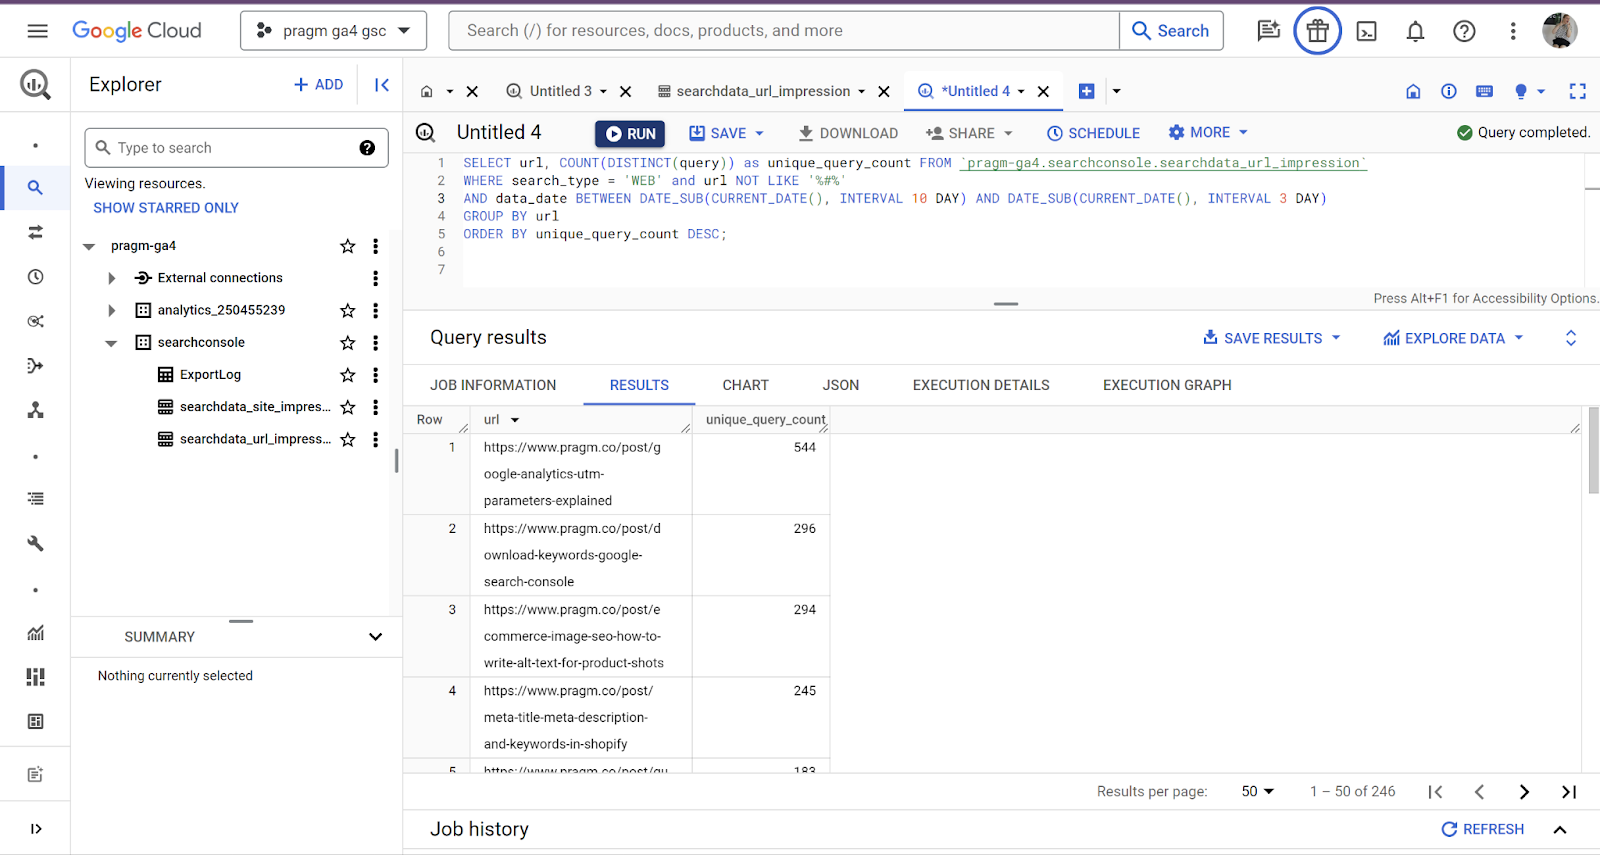 BigQuery complex SQL query in the internface